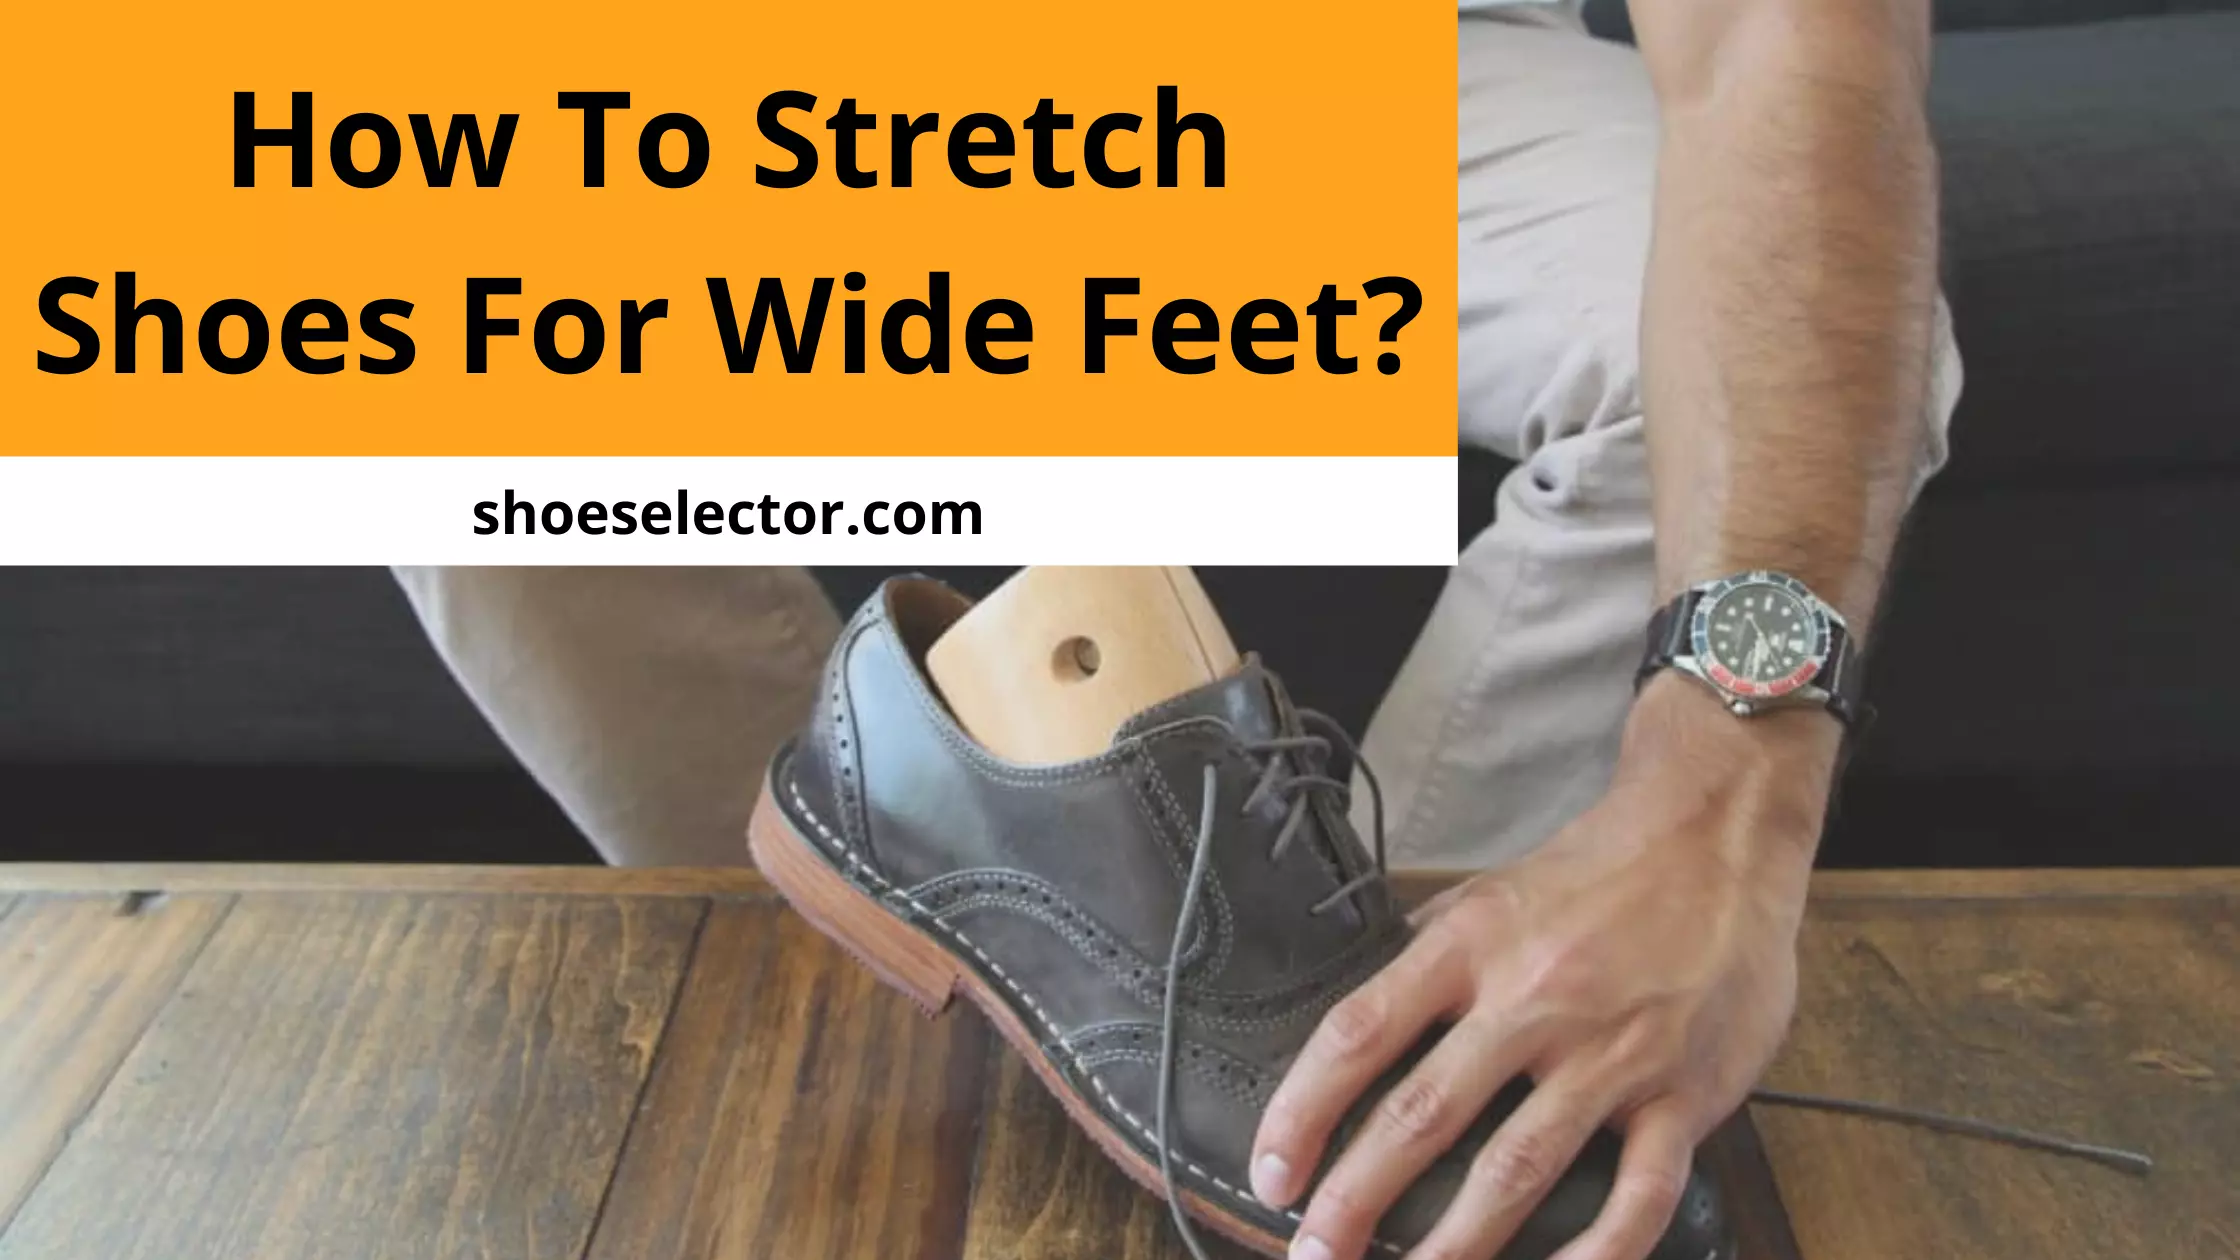 How To Stretch Shoes For Wide Feet? Brief Guide